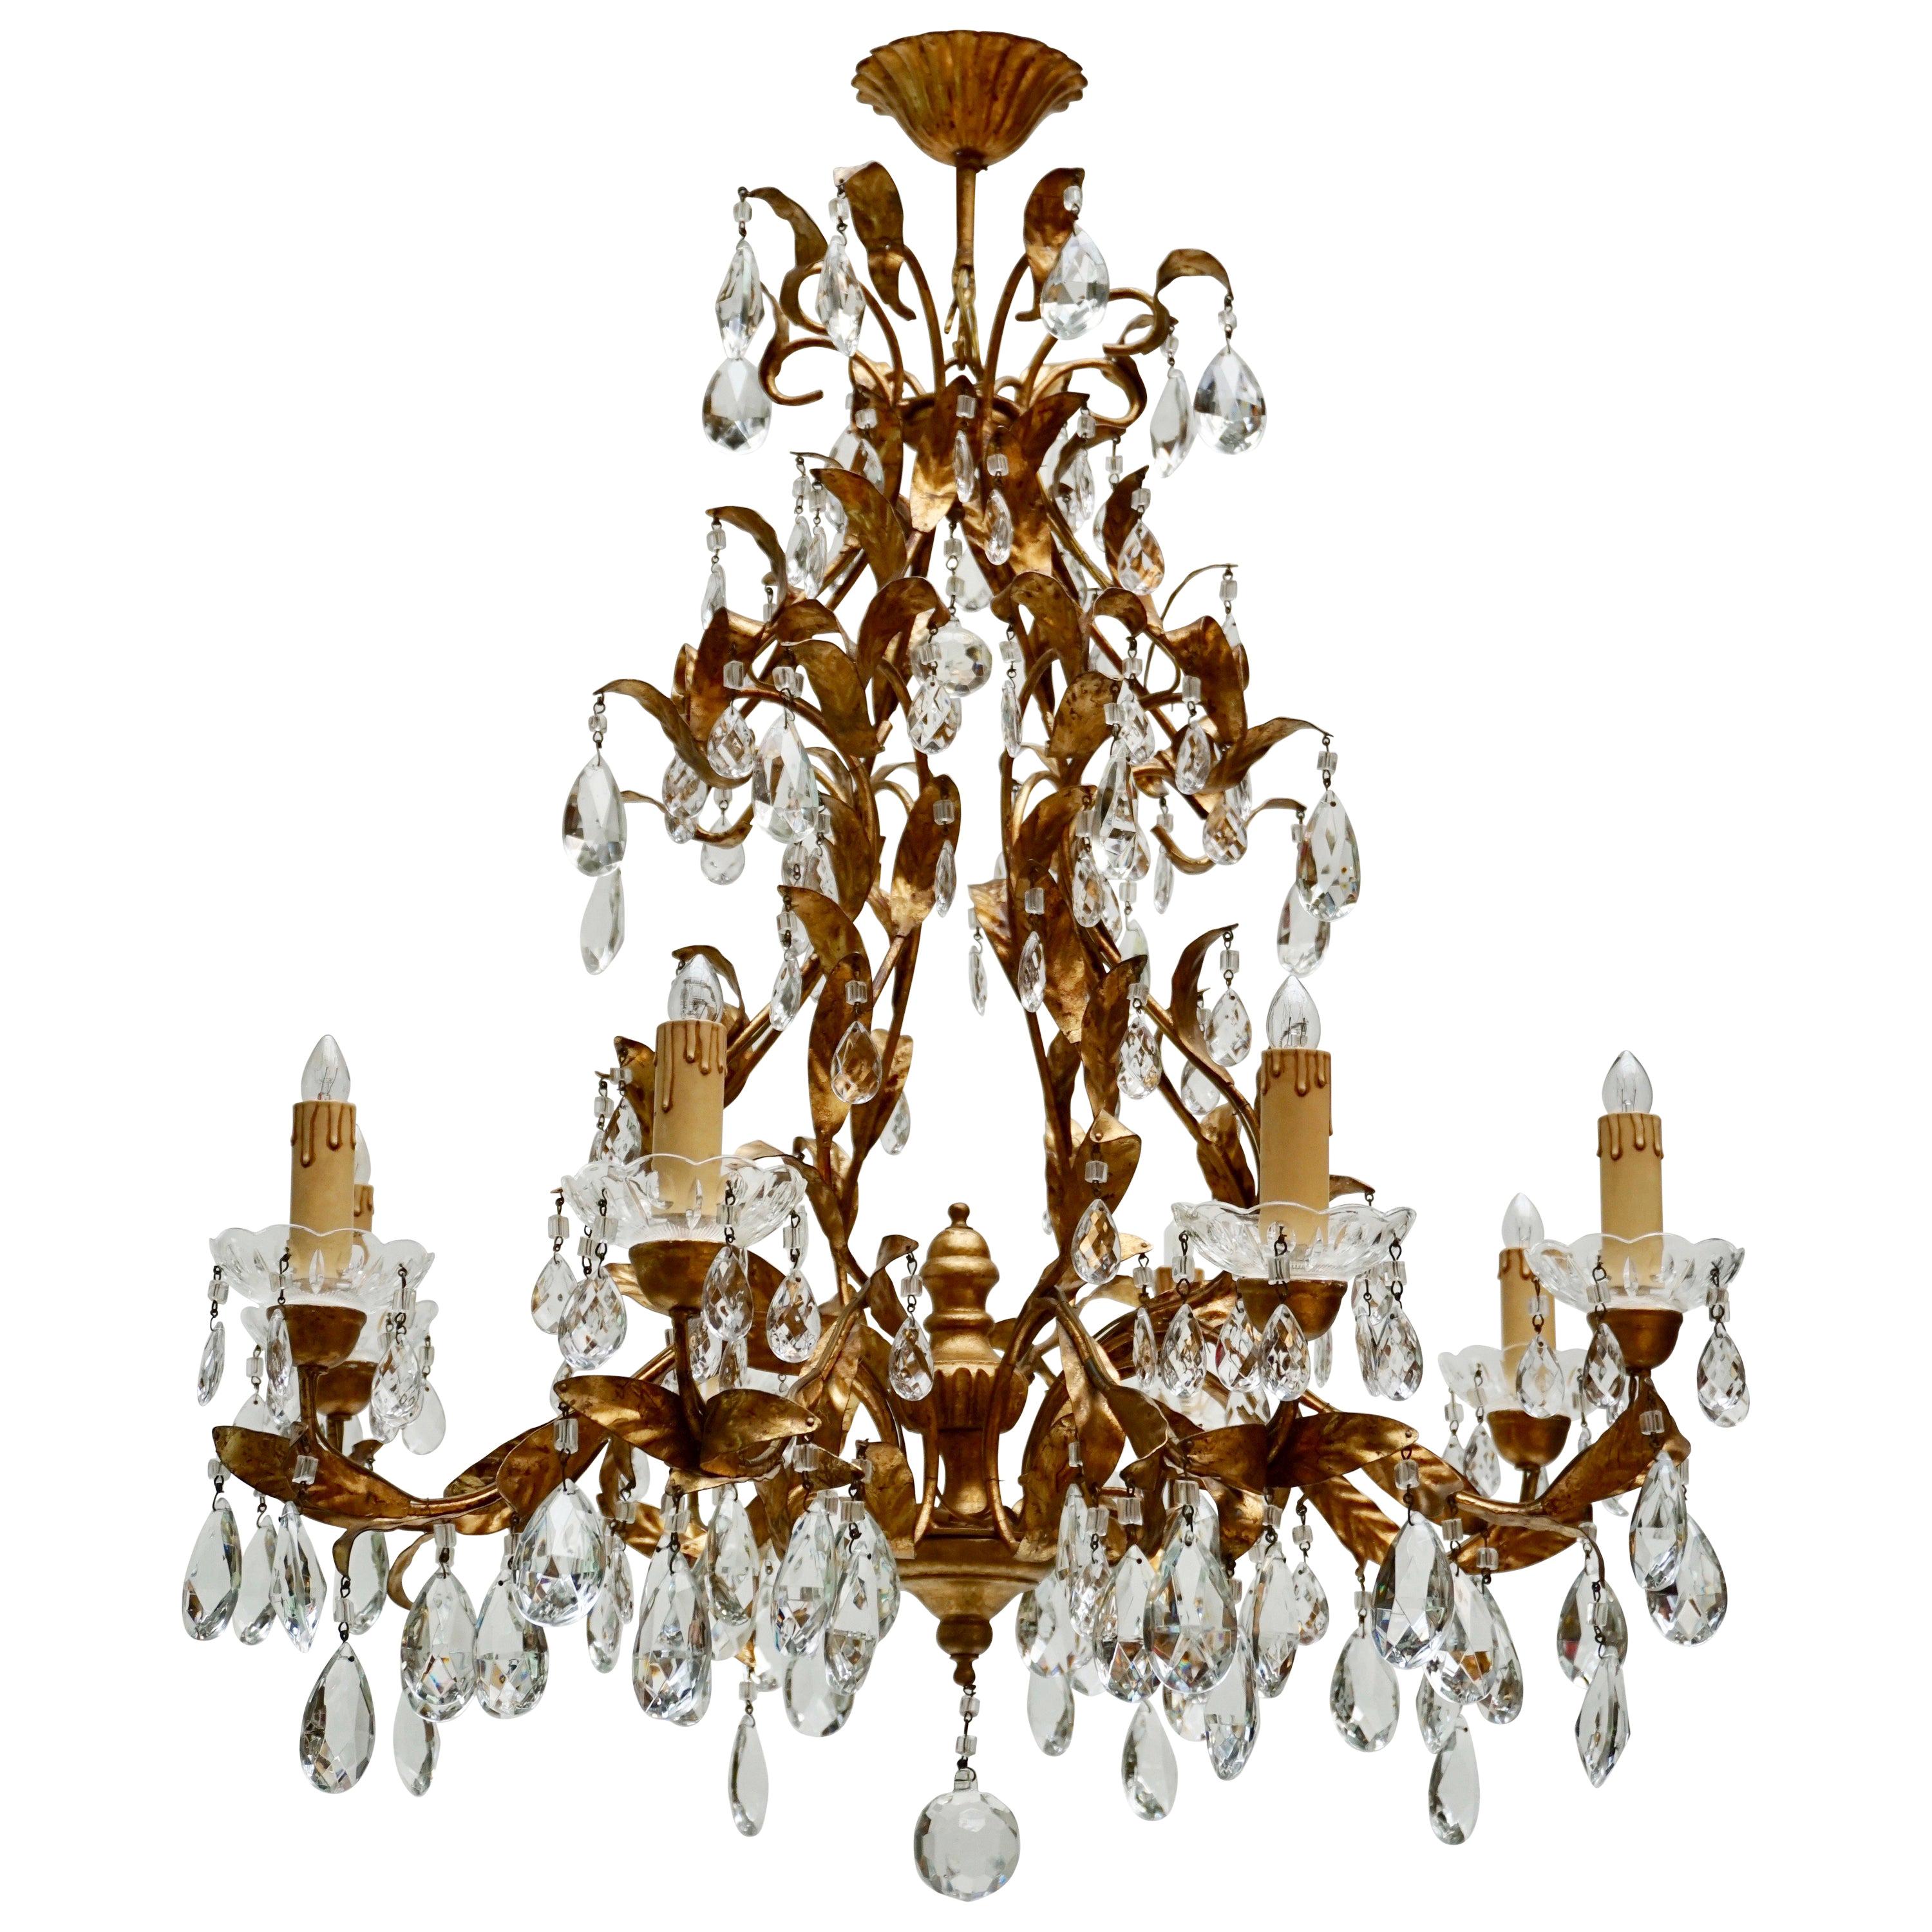 Gilded Brass Eight-Light Chandelier with Leaves and Crystal